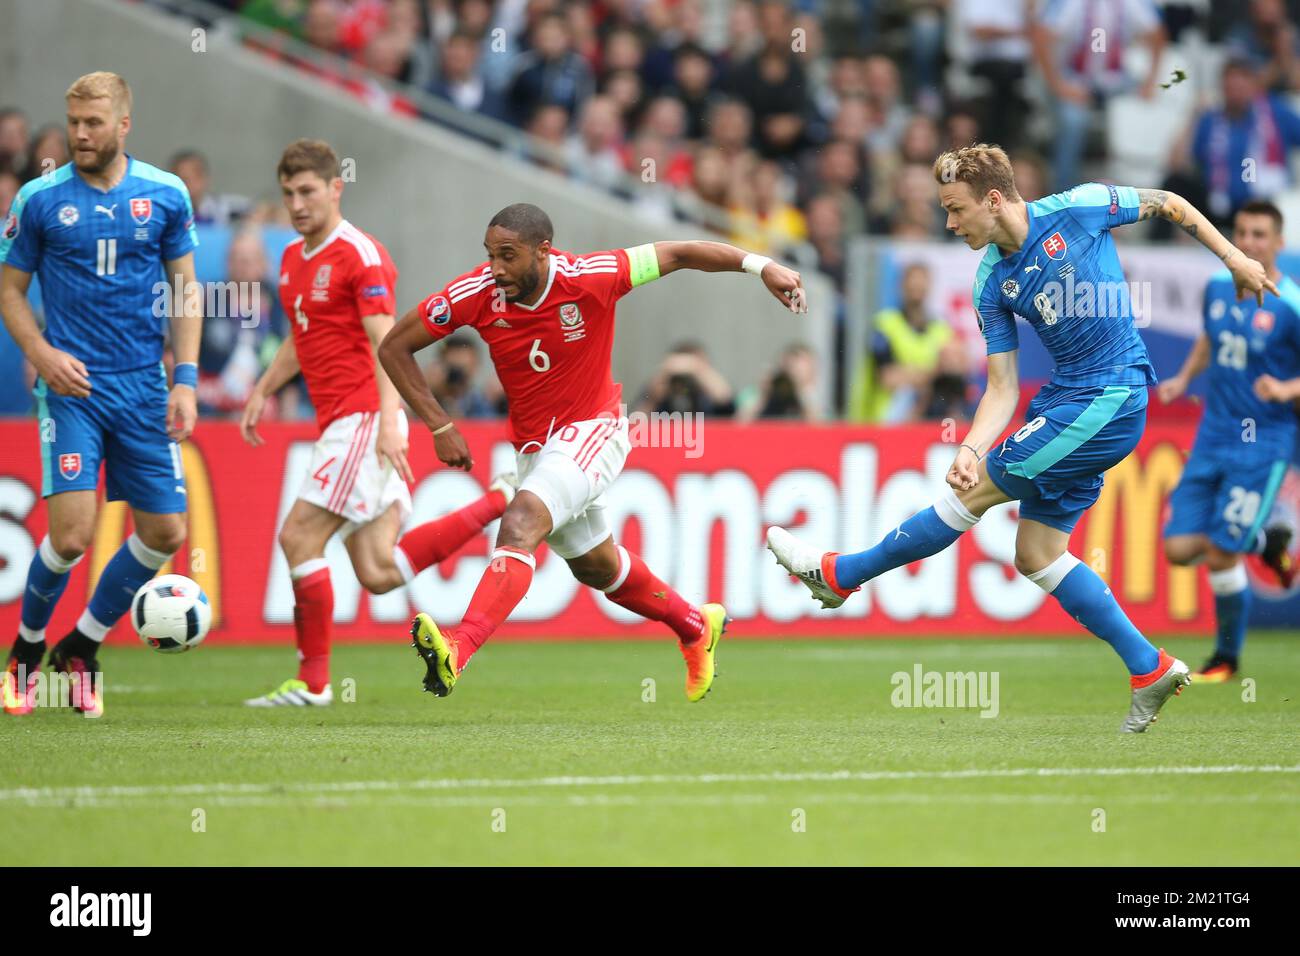 Slovakian Ondrej Duda scores a goal during a soccer game between Wales and Slovakia, in group B of the group stage of the UEFA Euro 2016 European Championships, Saturday 11 June 2016 in Bordeaux, France. BELGA PHOTO BRUNO FAHY Stock Photo